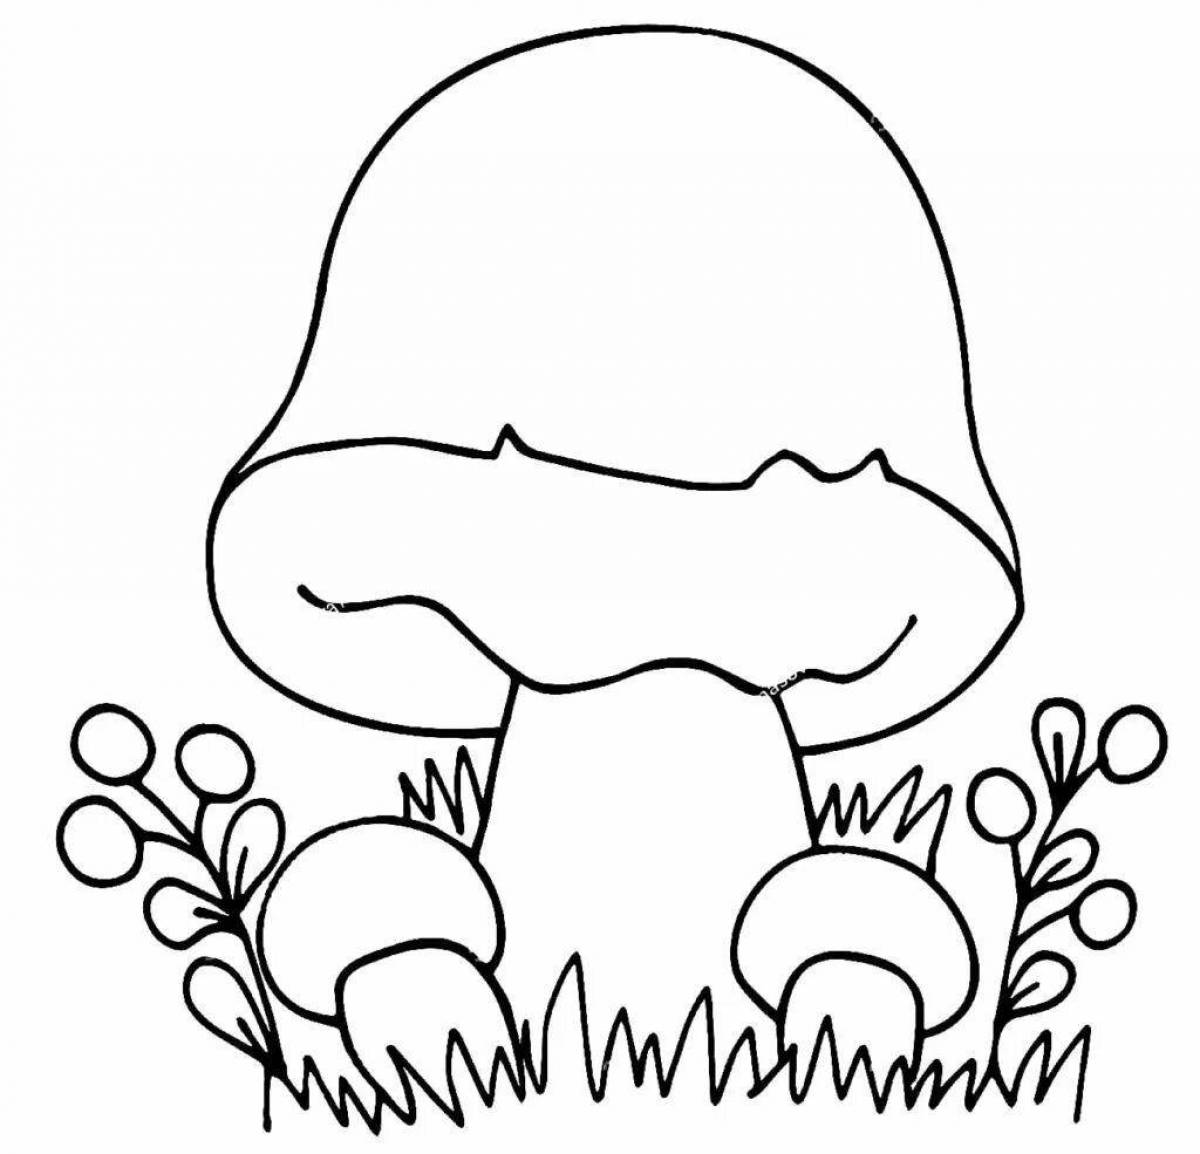 Outstanding mushroom coloring page for 4-5 year olds